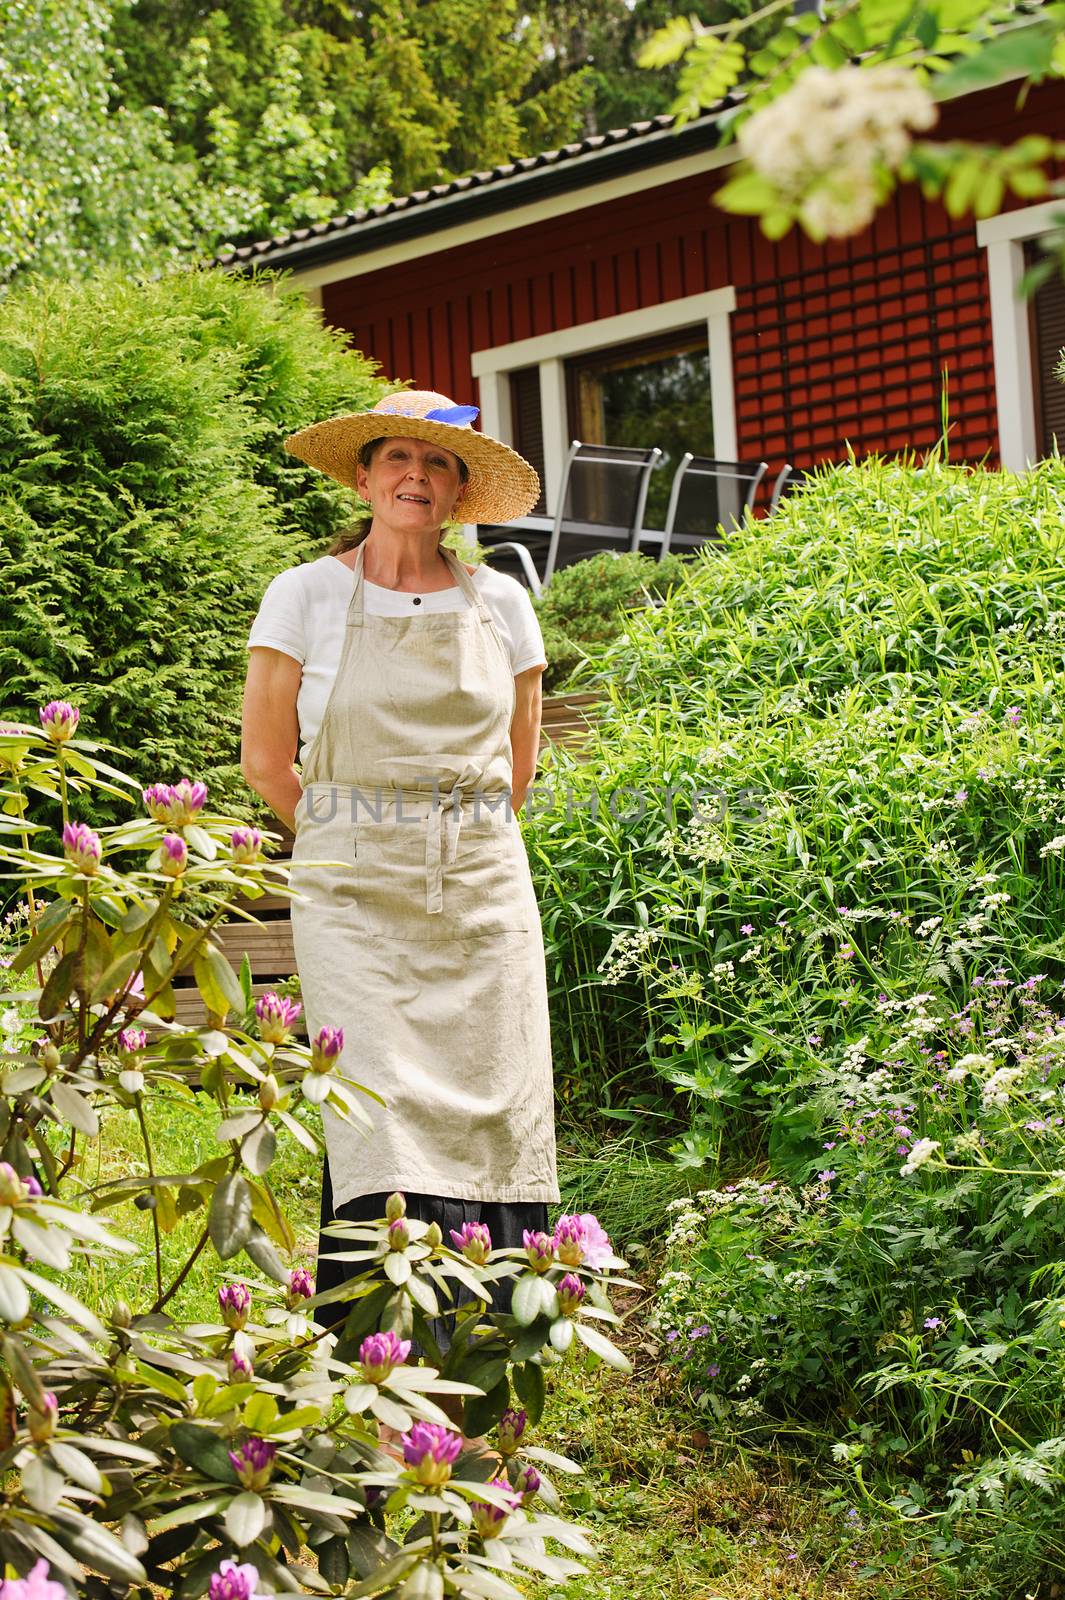 Senior woman standing in her garden, She is surrounded by bushes. There's a red house partly seen in the background. She's wearing an apron